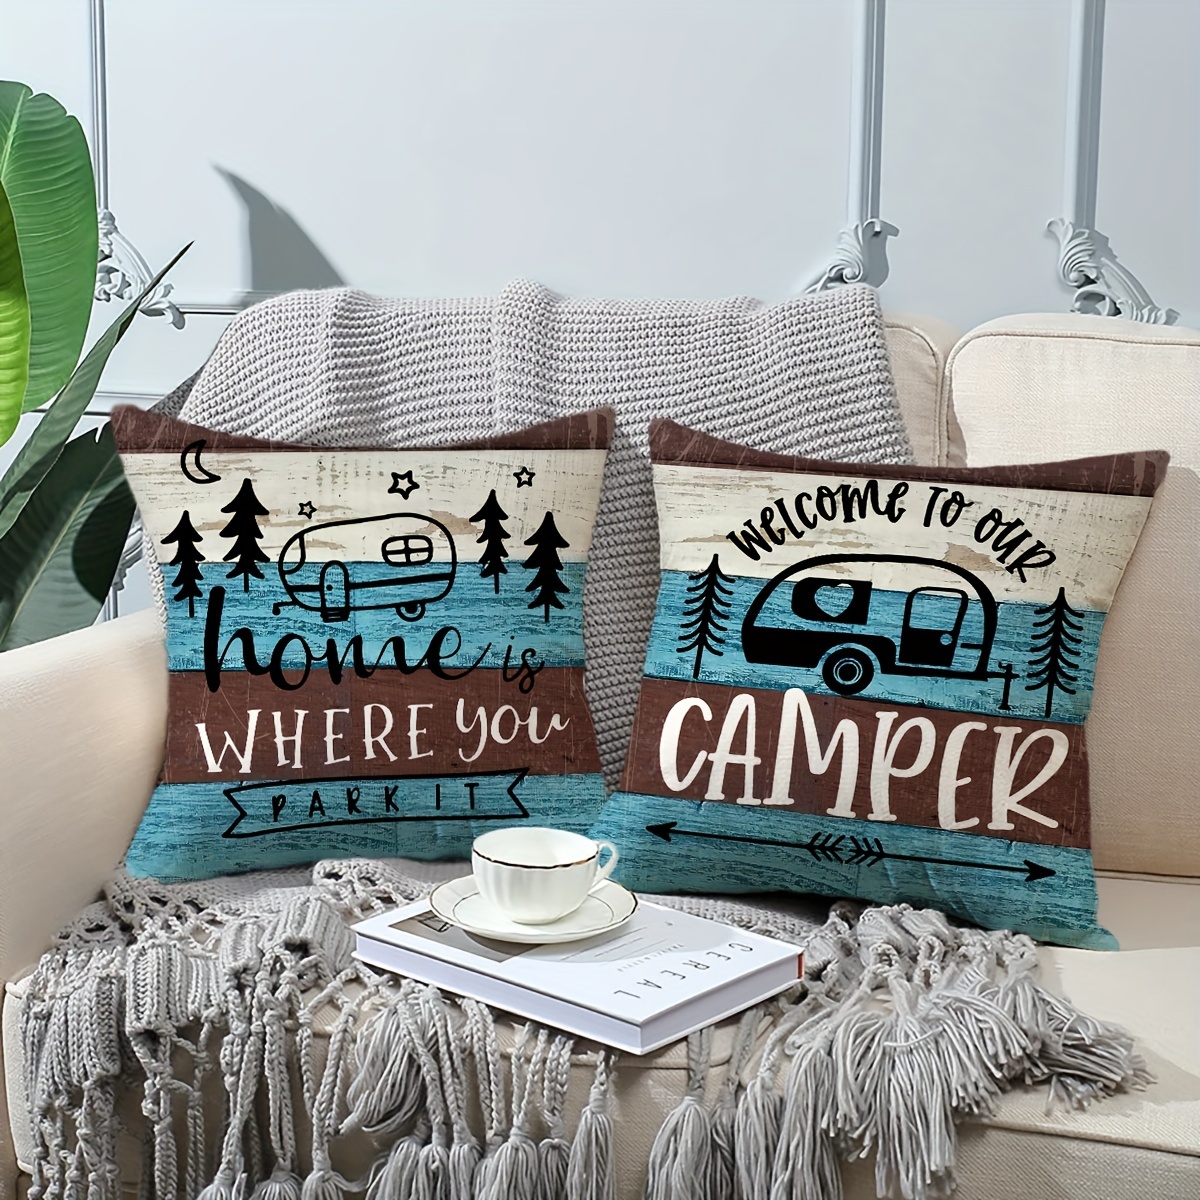 

4pcs Happy Camping Printed Throw Pillow Covers, 18*18inch Farmhouse Style Welcome To Our Camper Decor Cushion Cases, For Porch Patio Couch Sofa Living Room Outdoor, Without Pillow Inserts